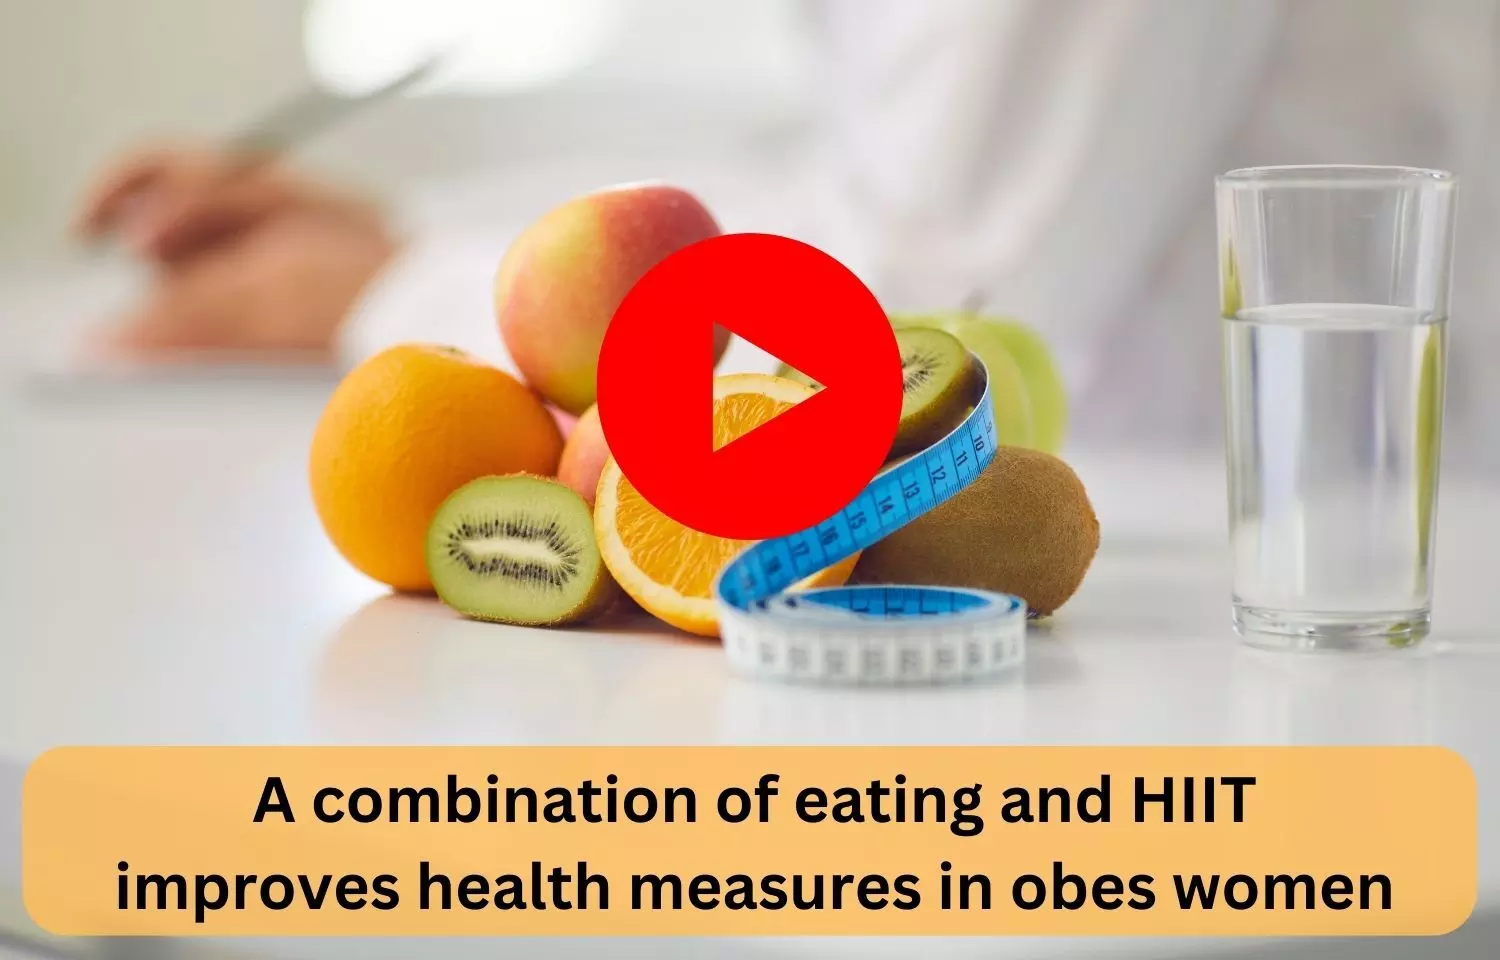 A combination of time-restricted eating and HIIT improves health measures in obese women